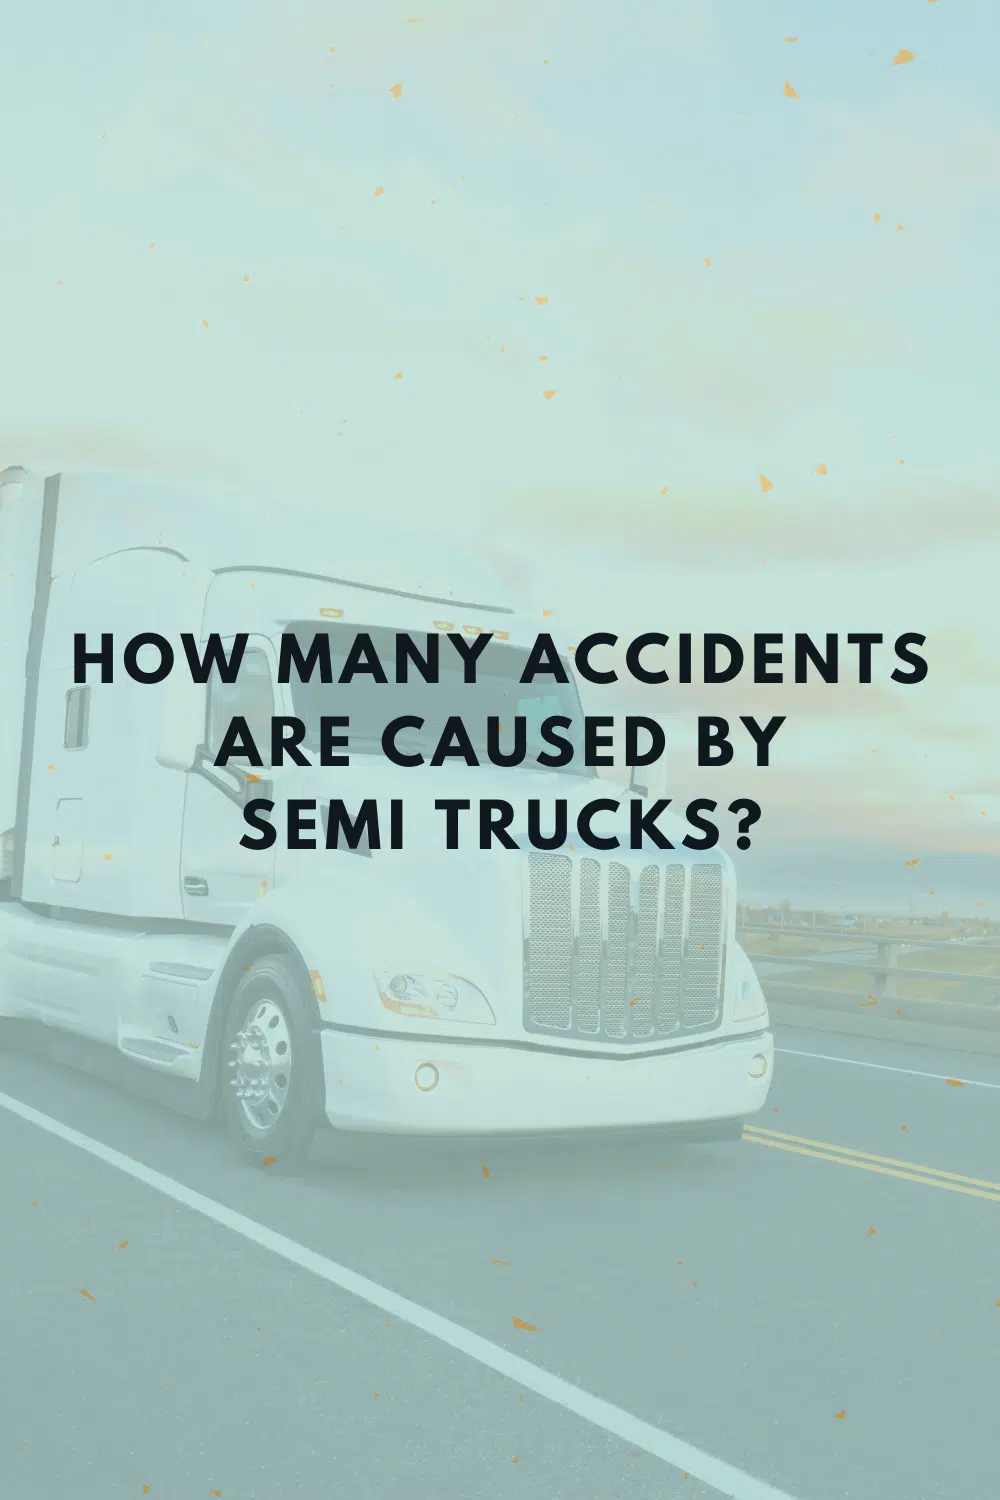 How Many Accidents Are Caused By Semi Trucks?